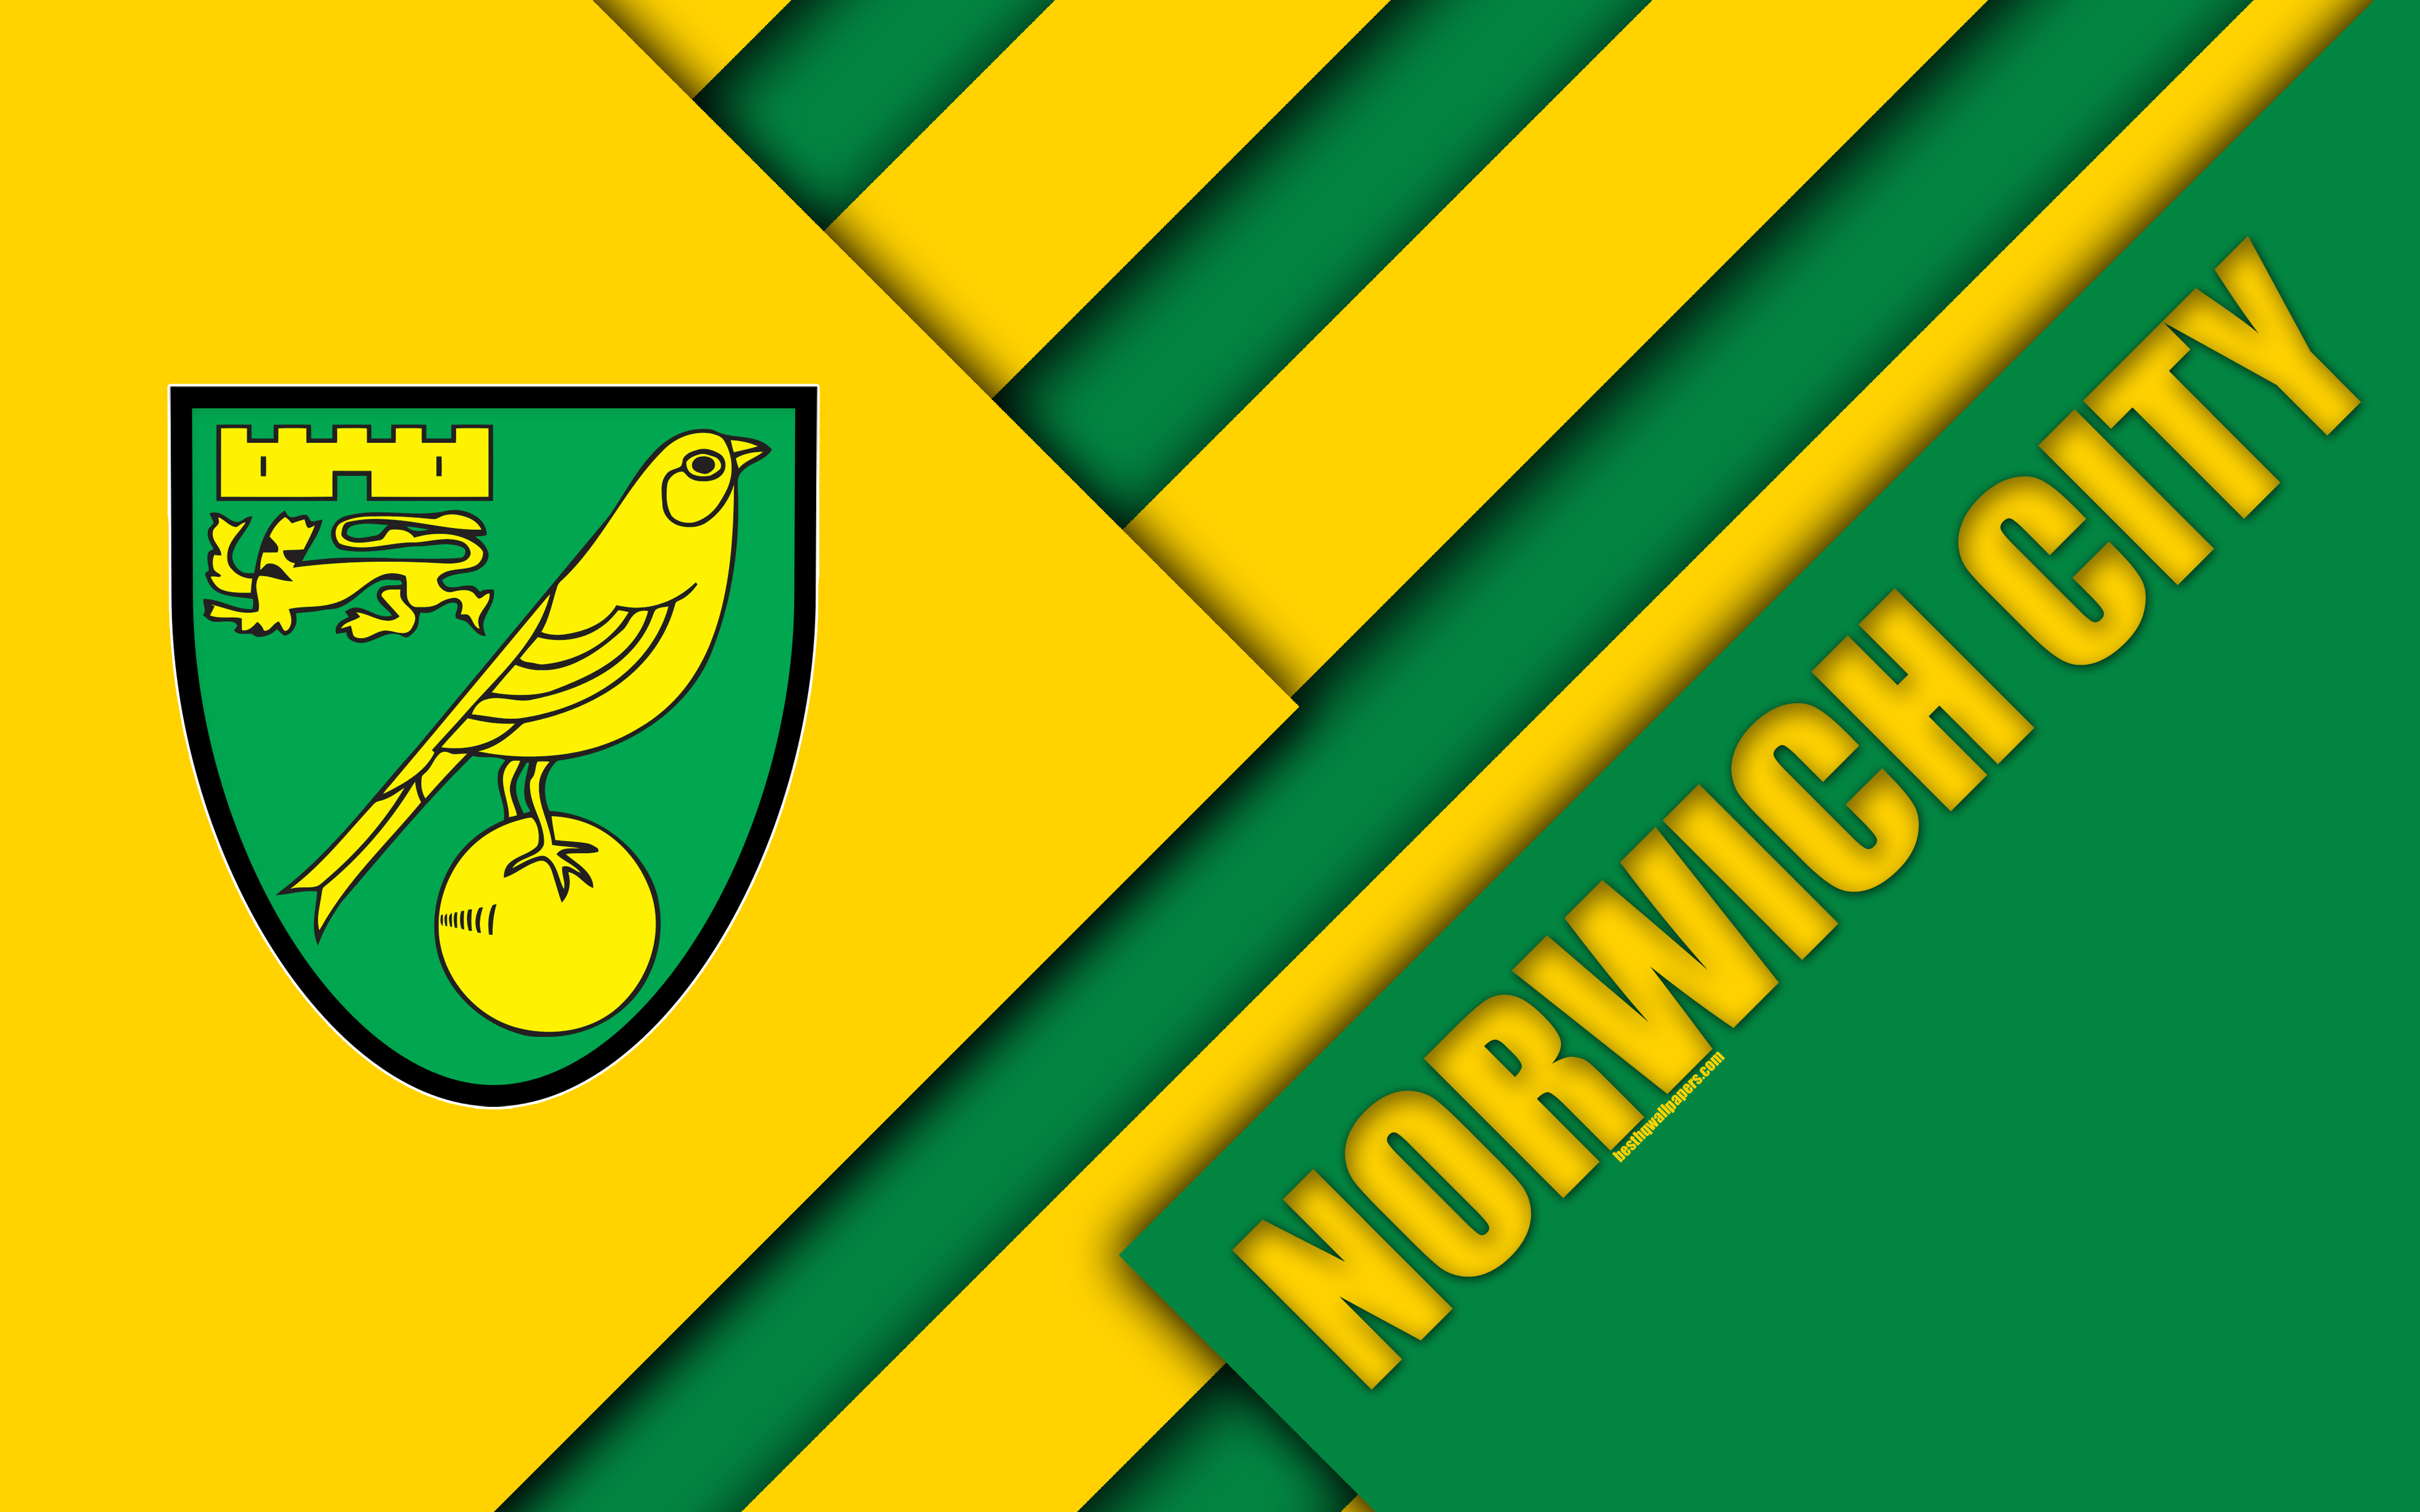 Download wallpapers norwich city fc logo k yellow green abstraction material design english football club norwich england uk football efl championship for desktop with resolution x high quality hd pictures wallpapers